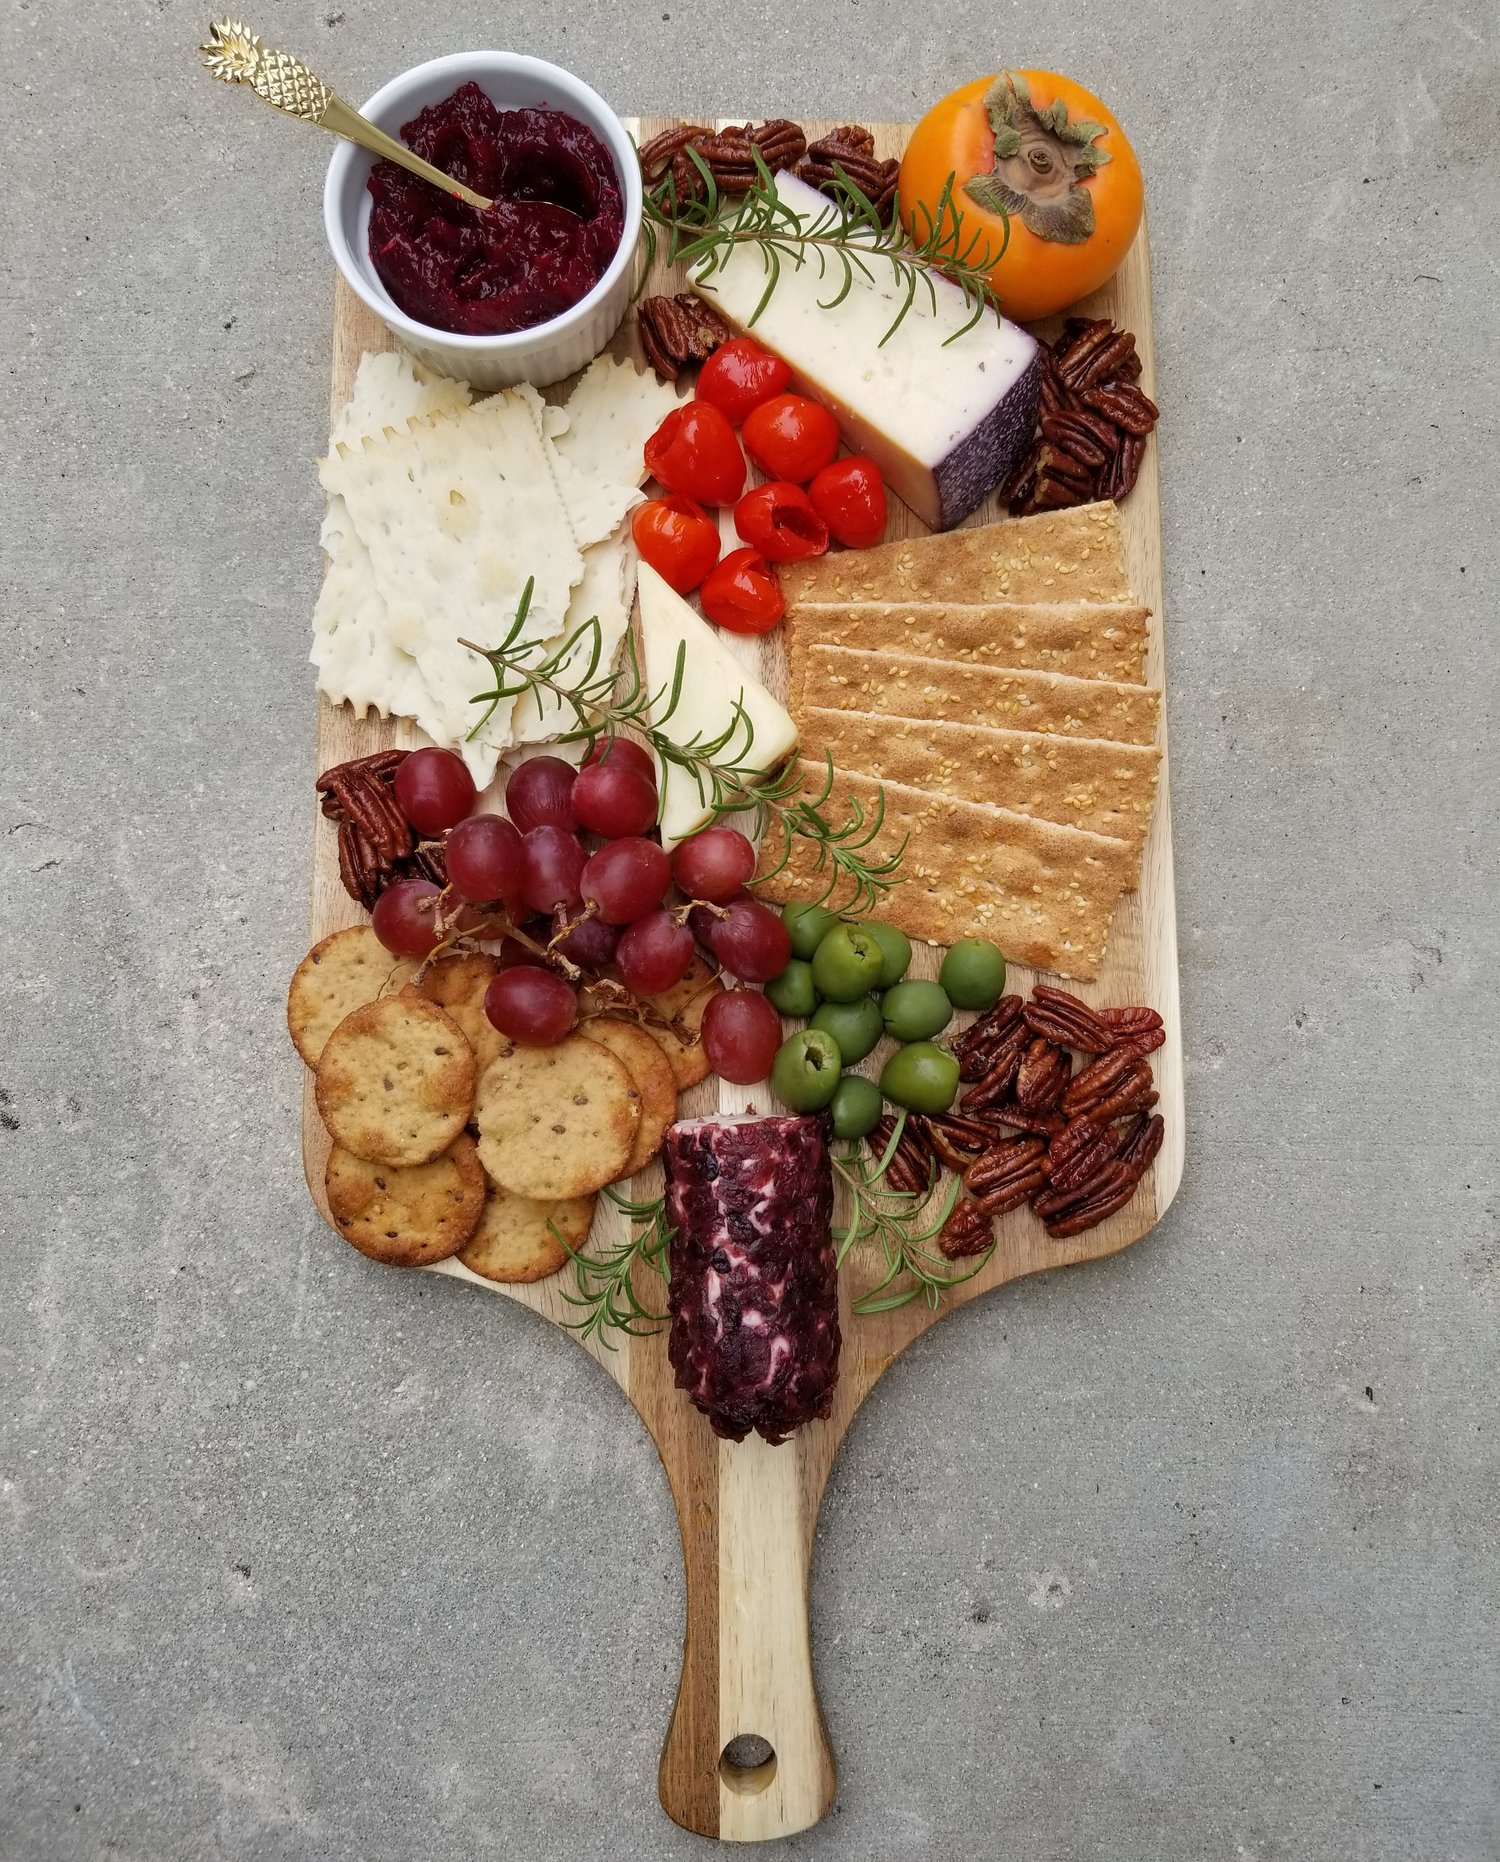 The most   epic   cheese board I’ve ever created - it’s only my 2nd one, but there’s more to come when they look this good!